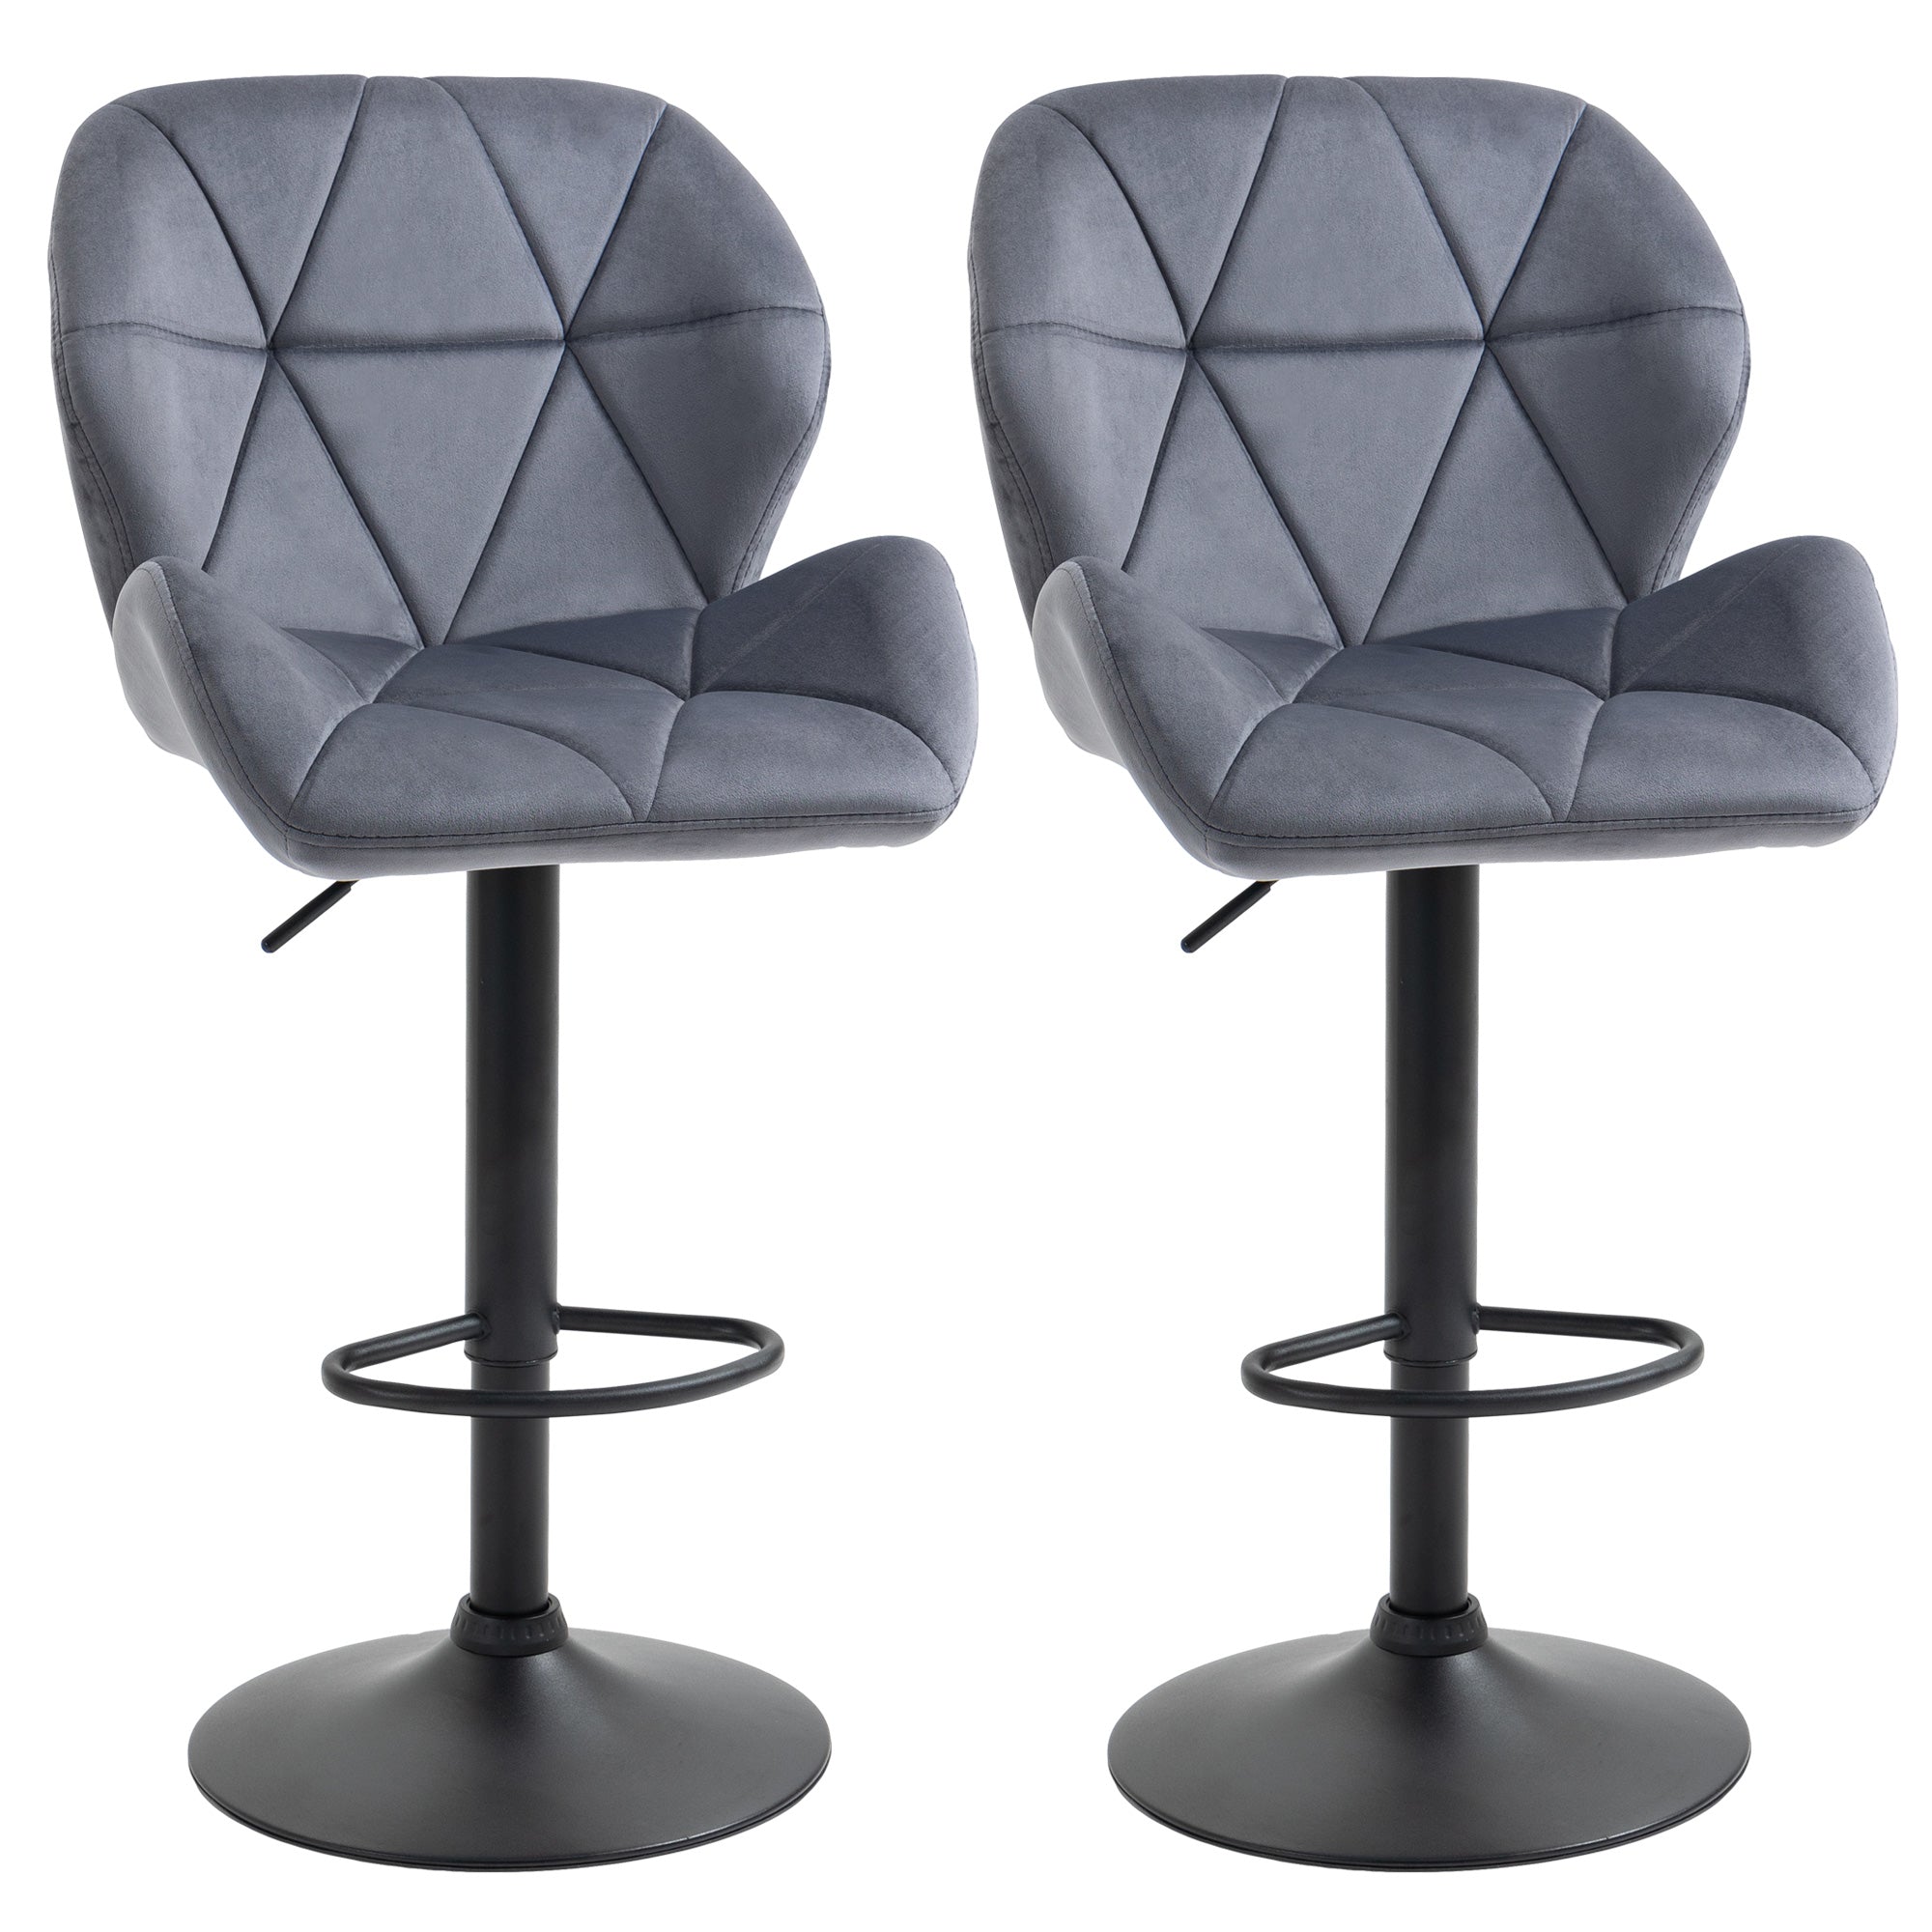 Set of 2 Adjustable Bar stools With Backs , Armless Upholstered Swivel Counter Chairs, Barstools with Back, Footrest, Dark Grey  AOSOM   